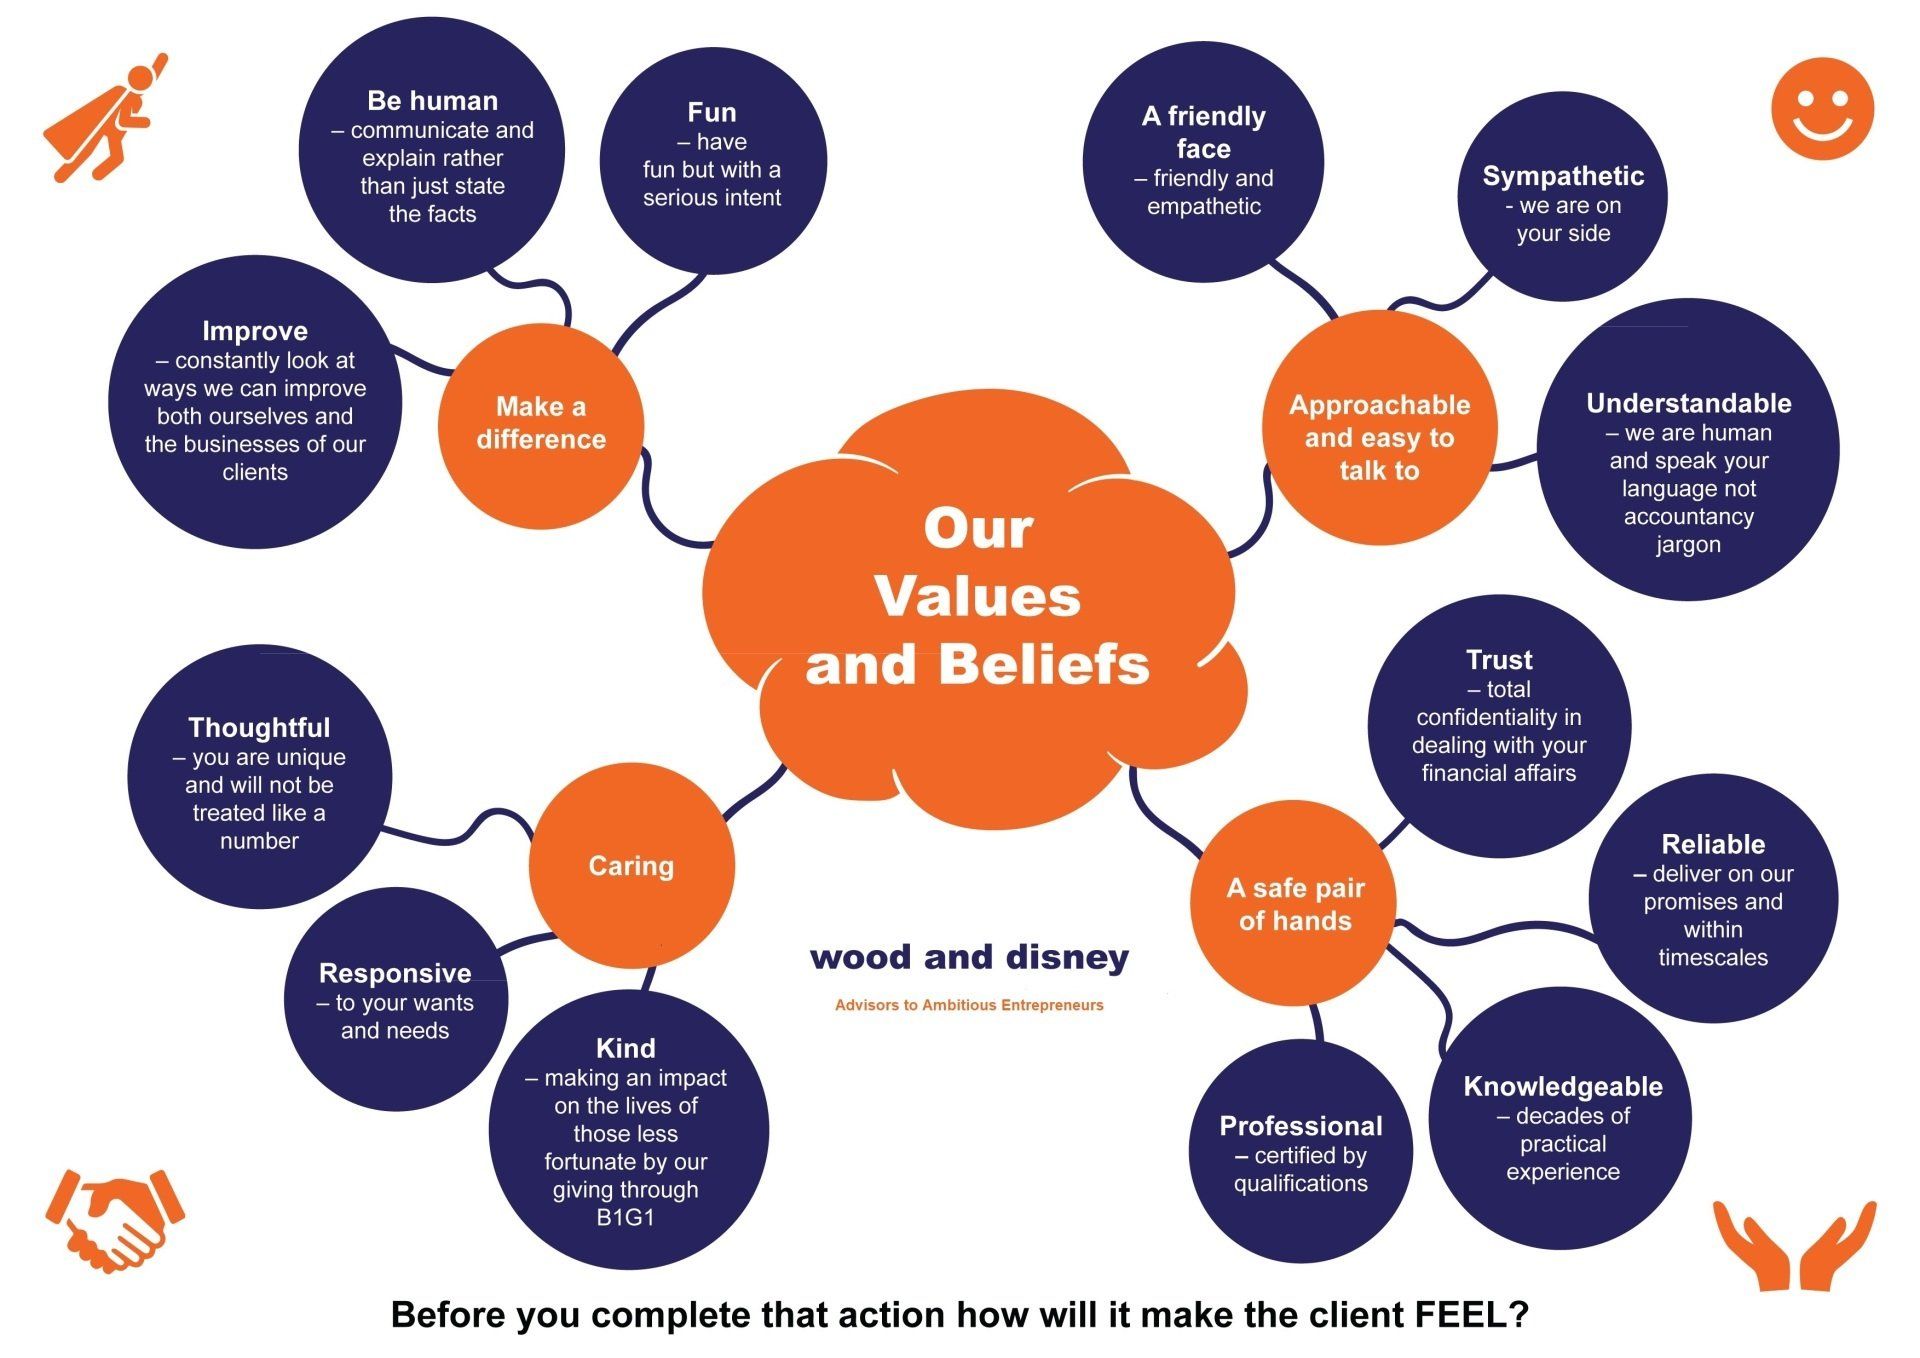 Our core values and beliefs